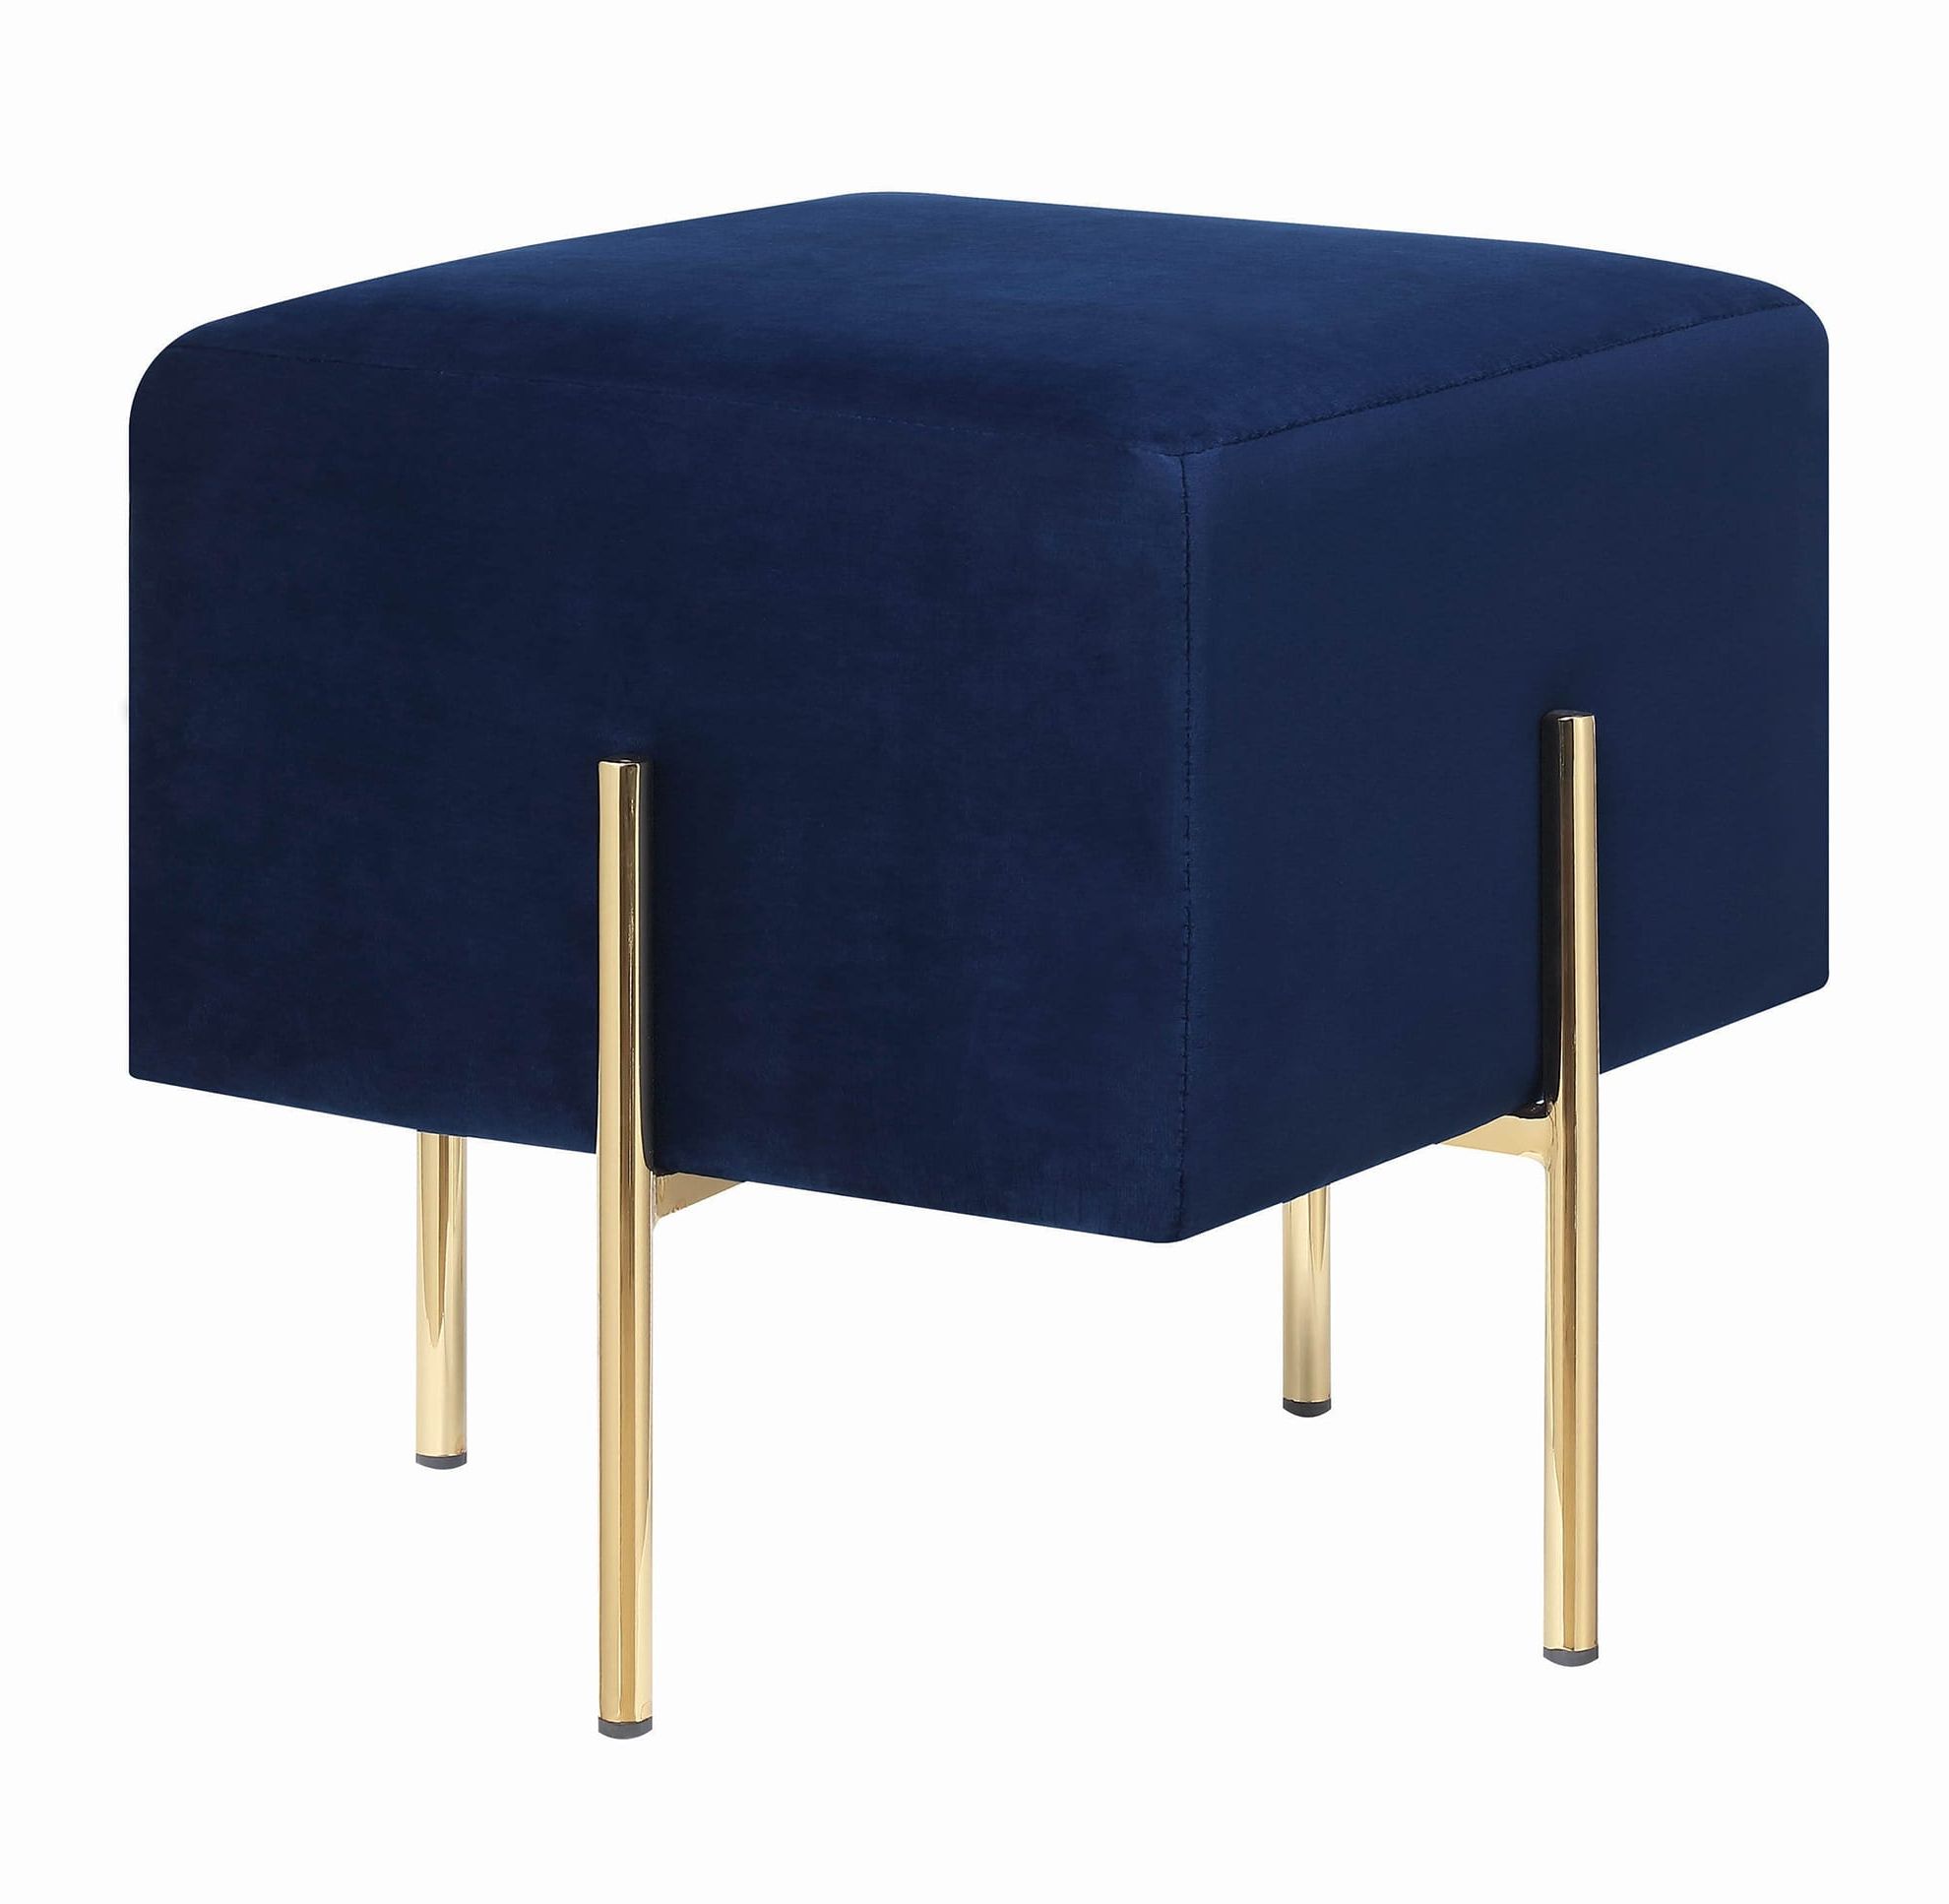 Quality Furniture At Affordable Prices In With Regard To Pouf Textured Blue Round Pouf Ottomans (View 3 of 10)